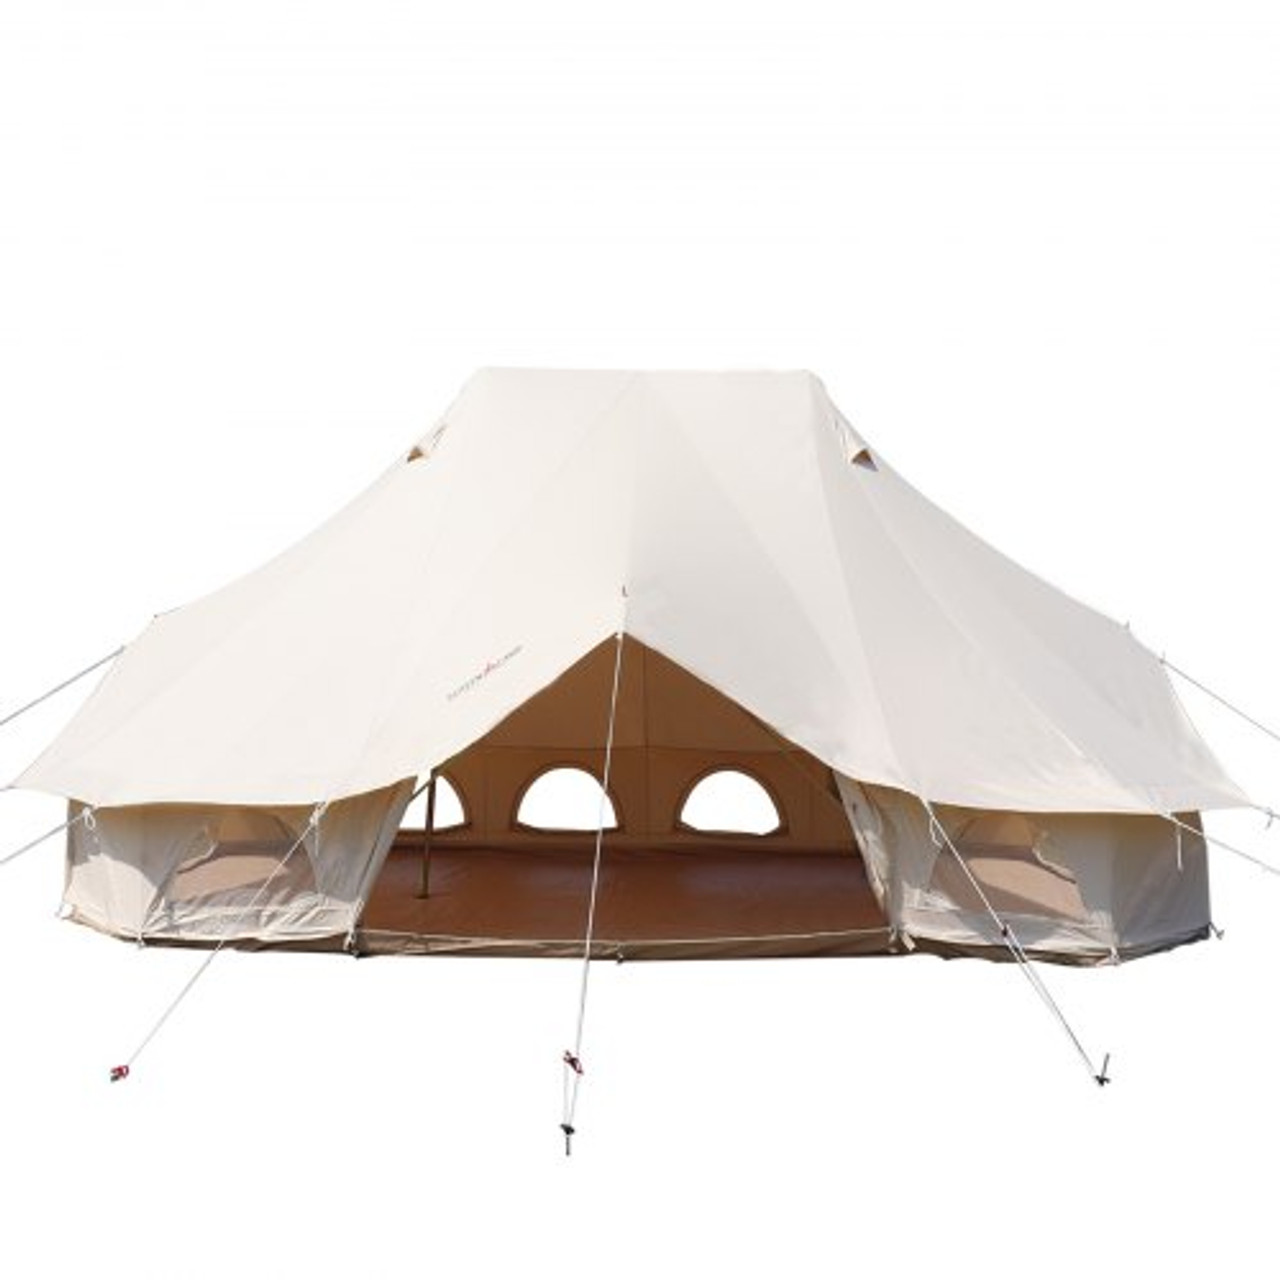 6m Bell Tent 19.7x13.1x9.8 ft Yurt Beige Canvas Tent Cotton Glamping Tents 8-12 Person 4 Season Teepee Tent Portable for Adults Luxury Safari Tent for Family Outdoor Camping Lightweight